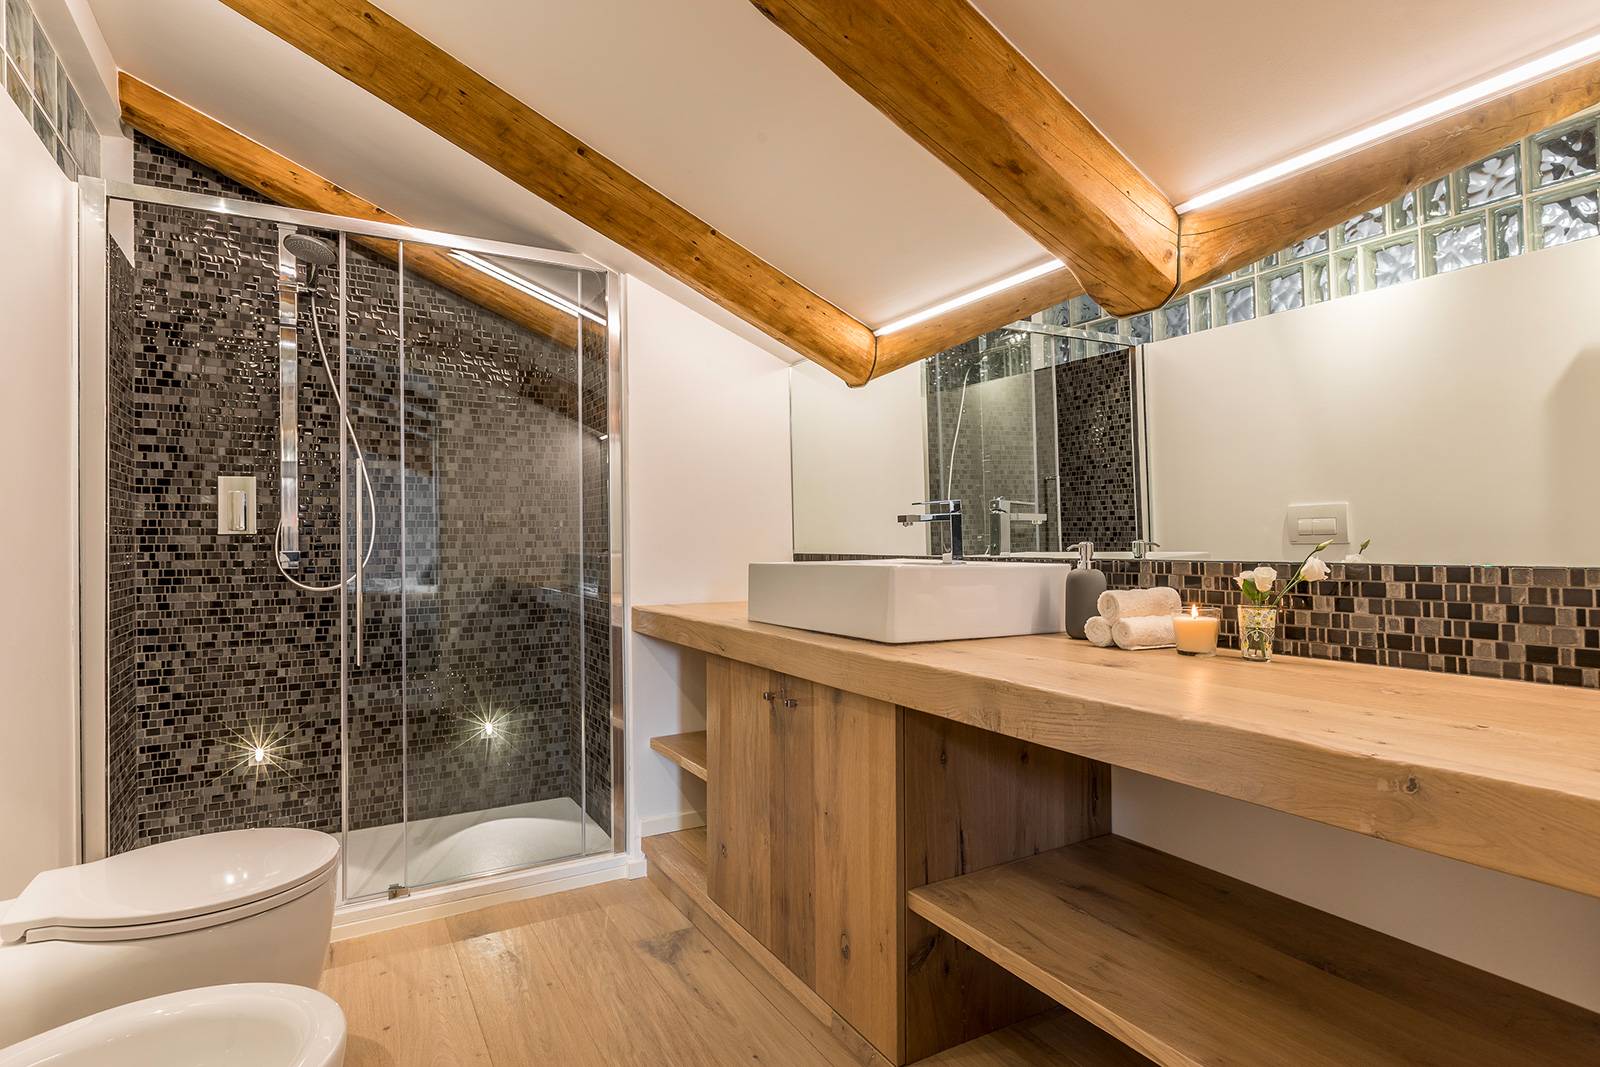 the luxury en-suite bathroom with nice mosaic tiled shower is a real treat